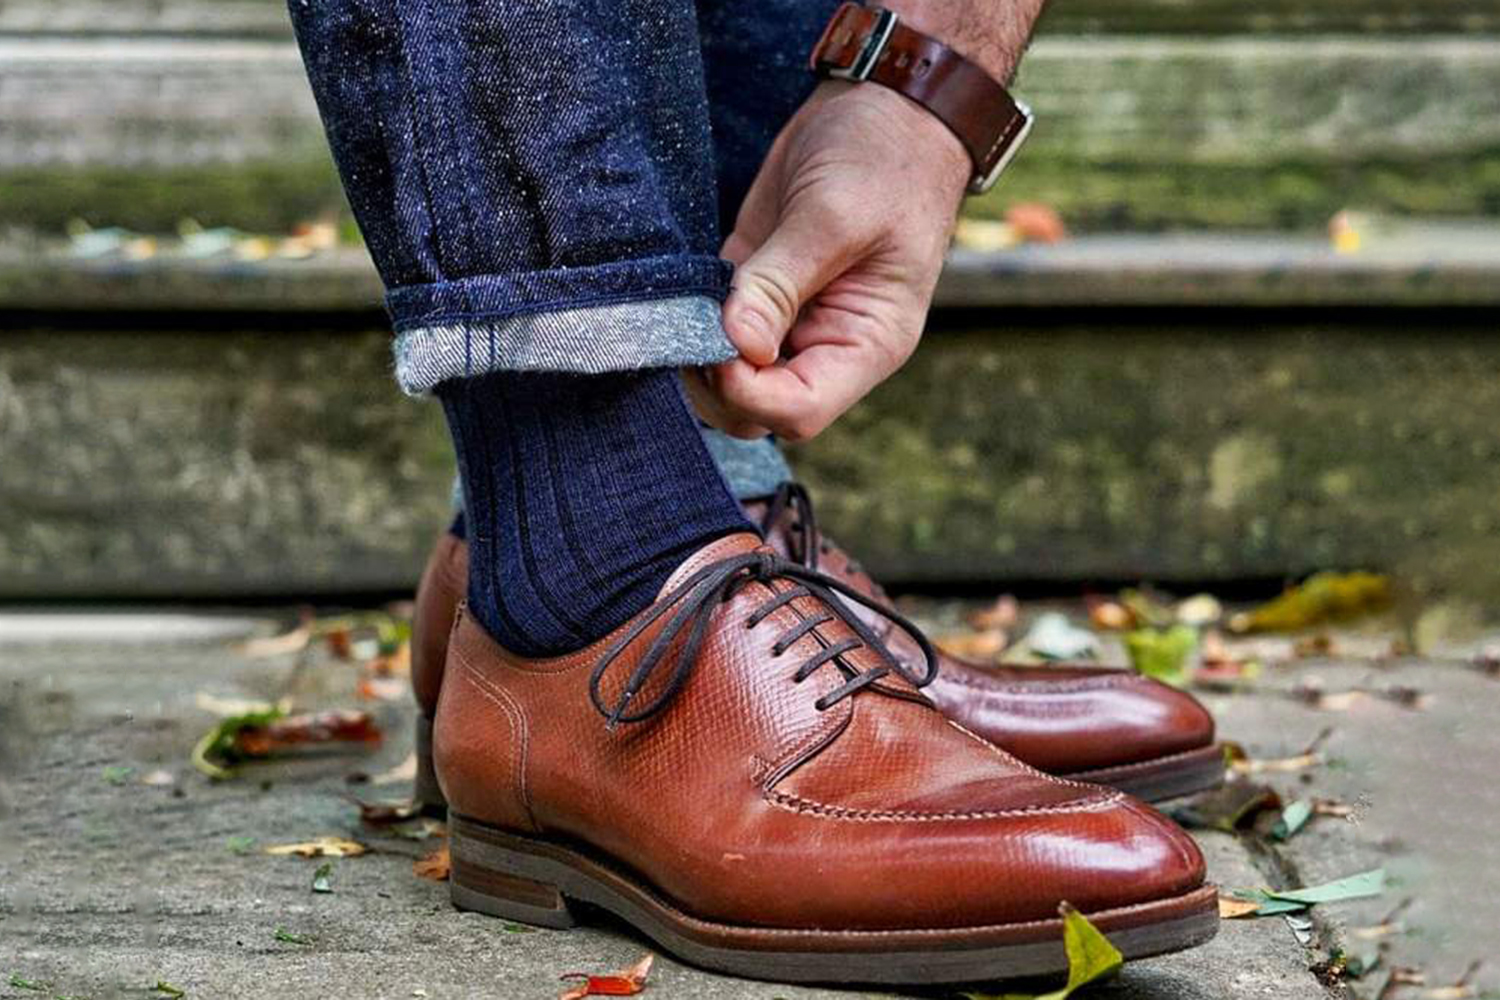 The 15 Best Socks for Men in 2022 and How To Wear Them - The Manual